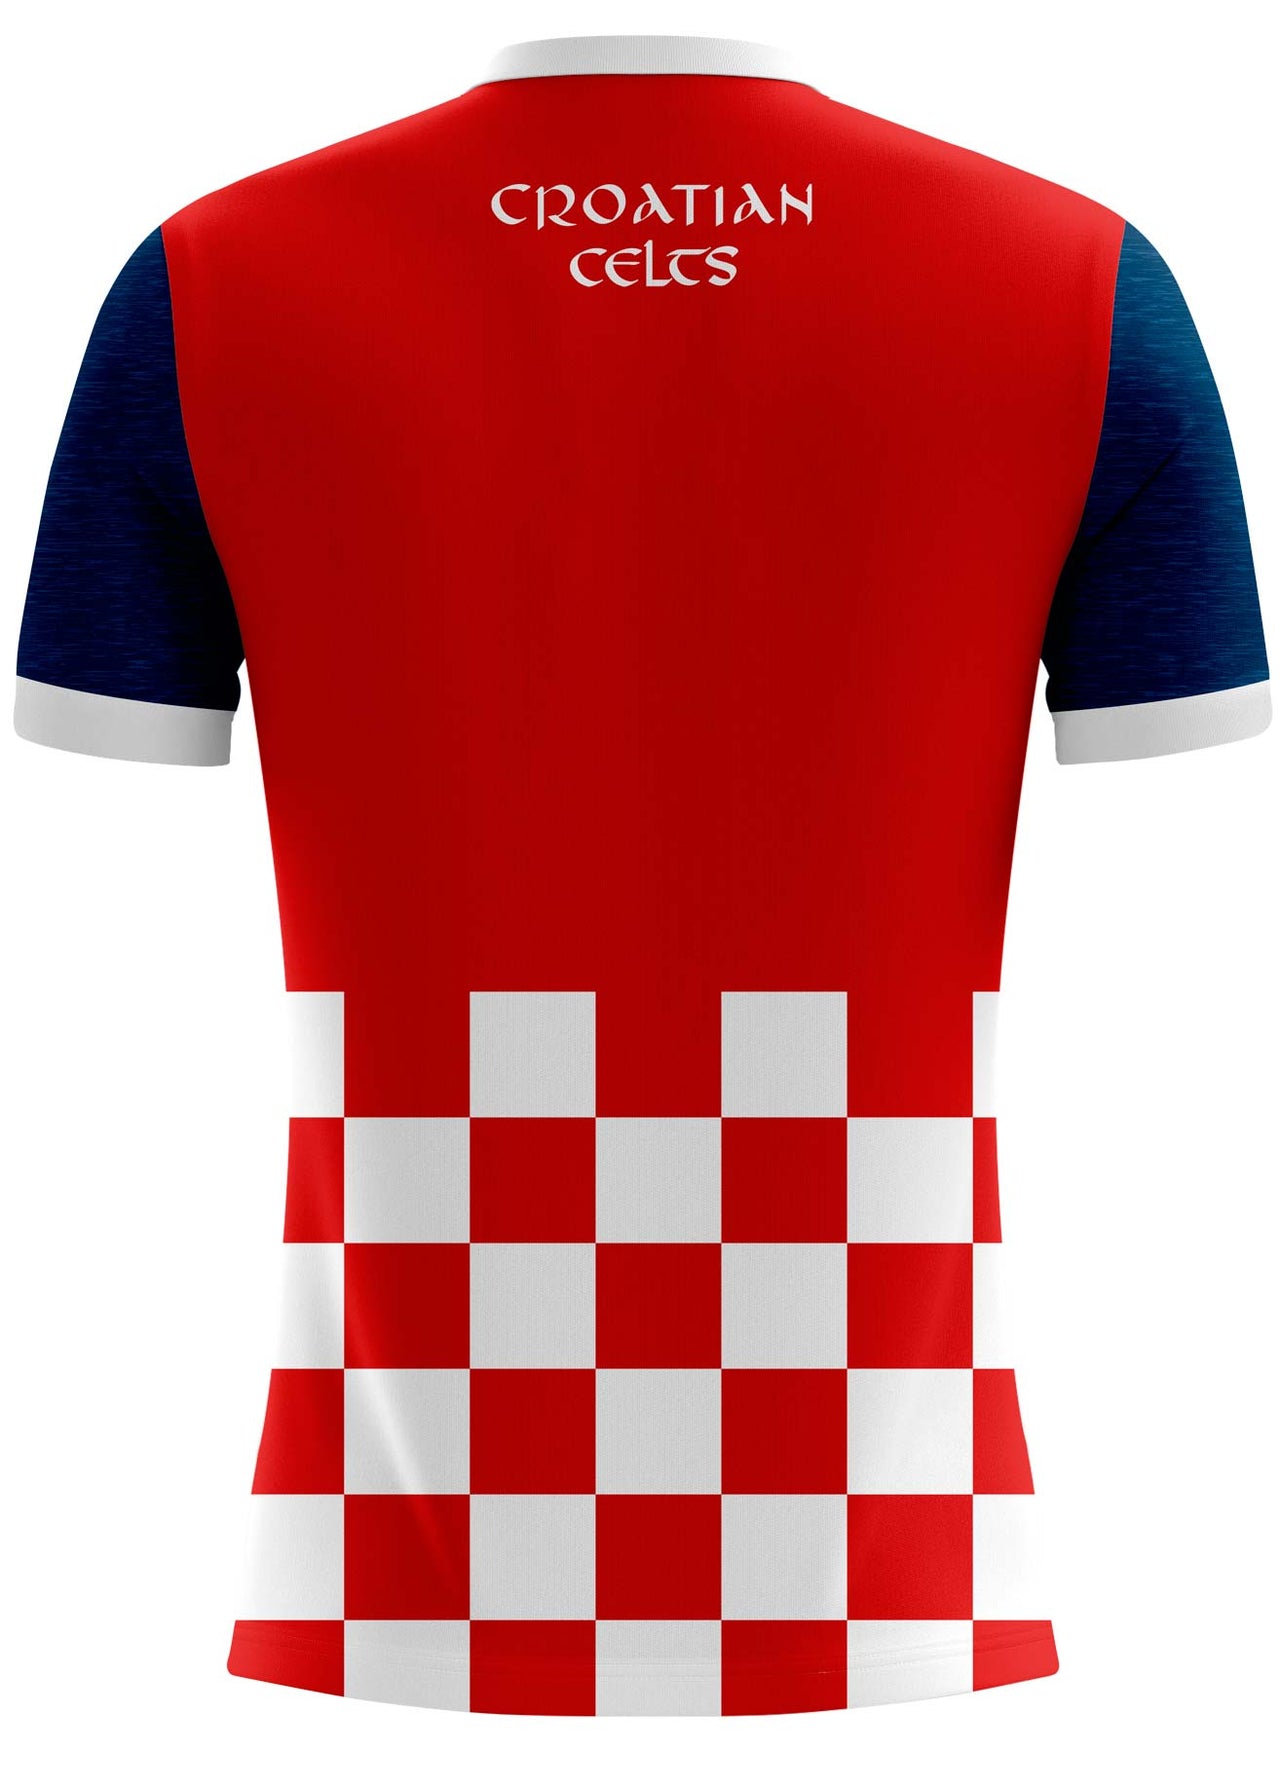 Croatian Celts Training Jersey Player Fit Adult